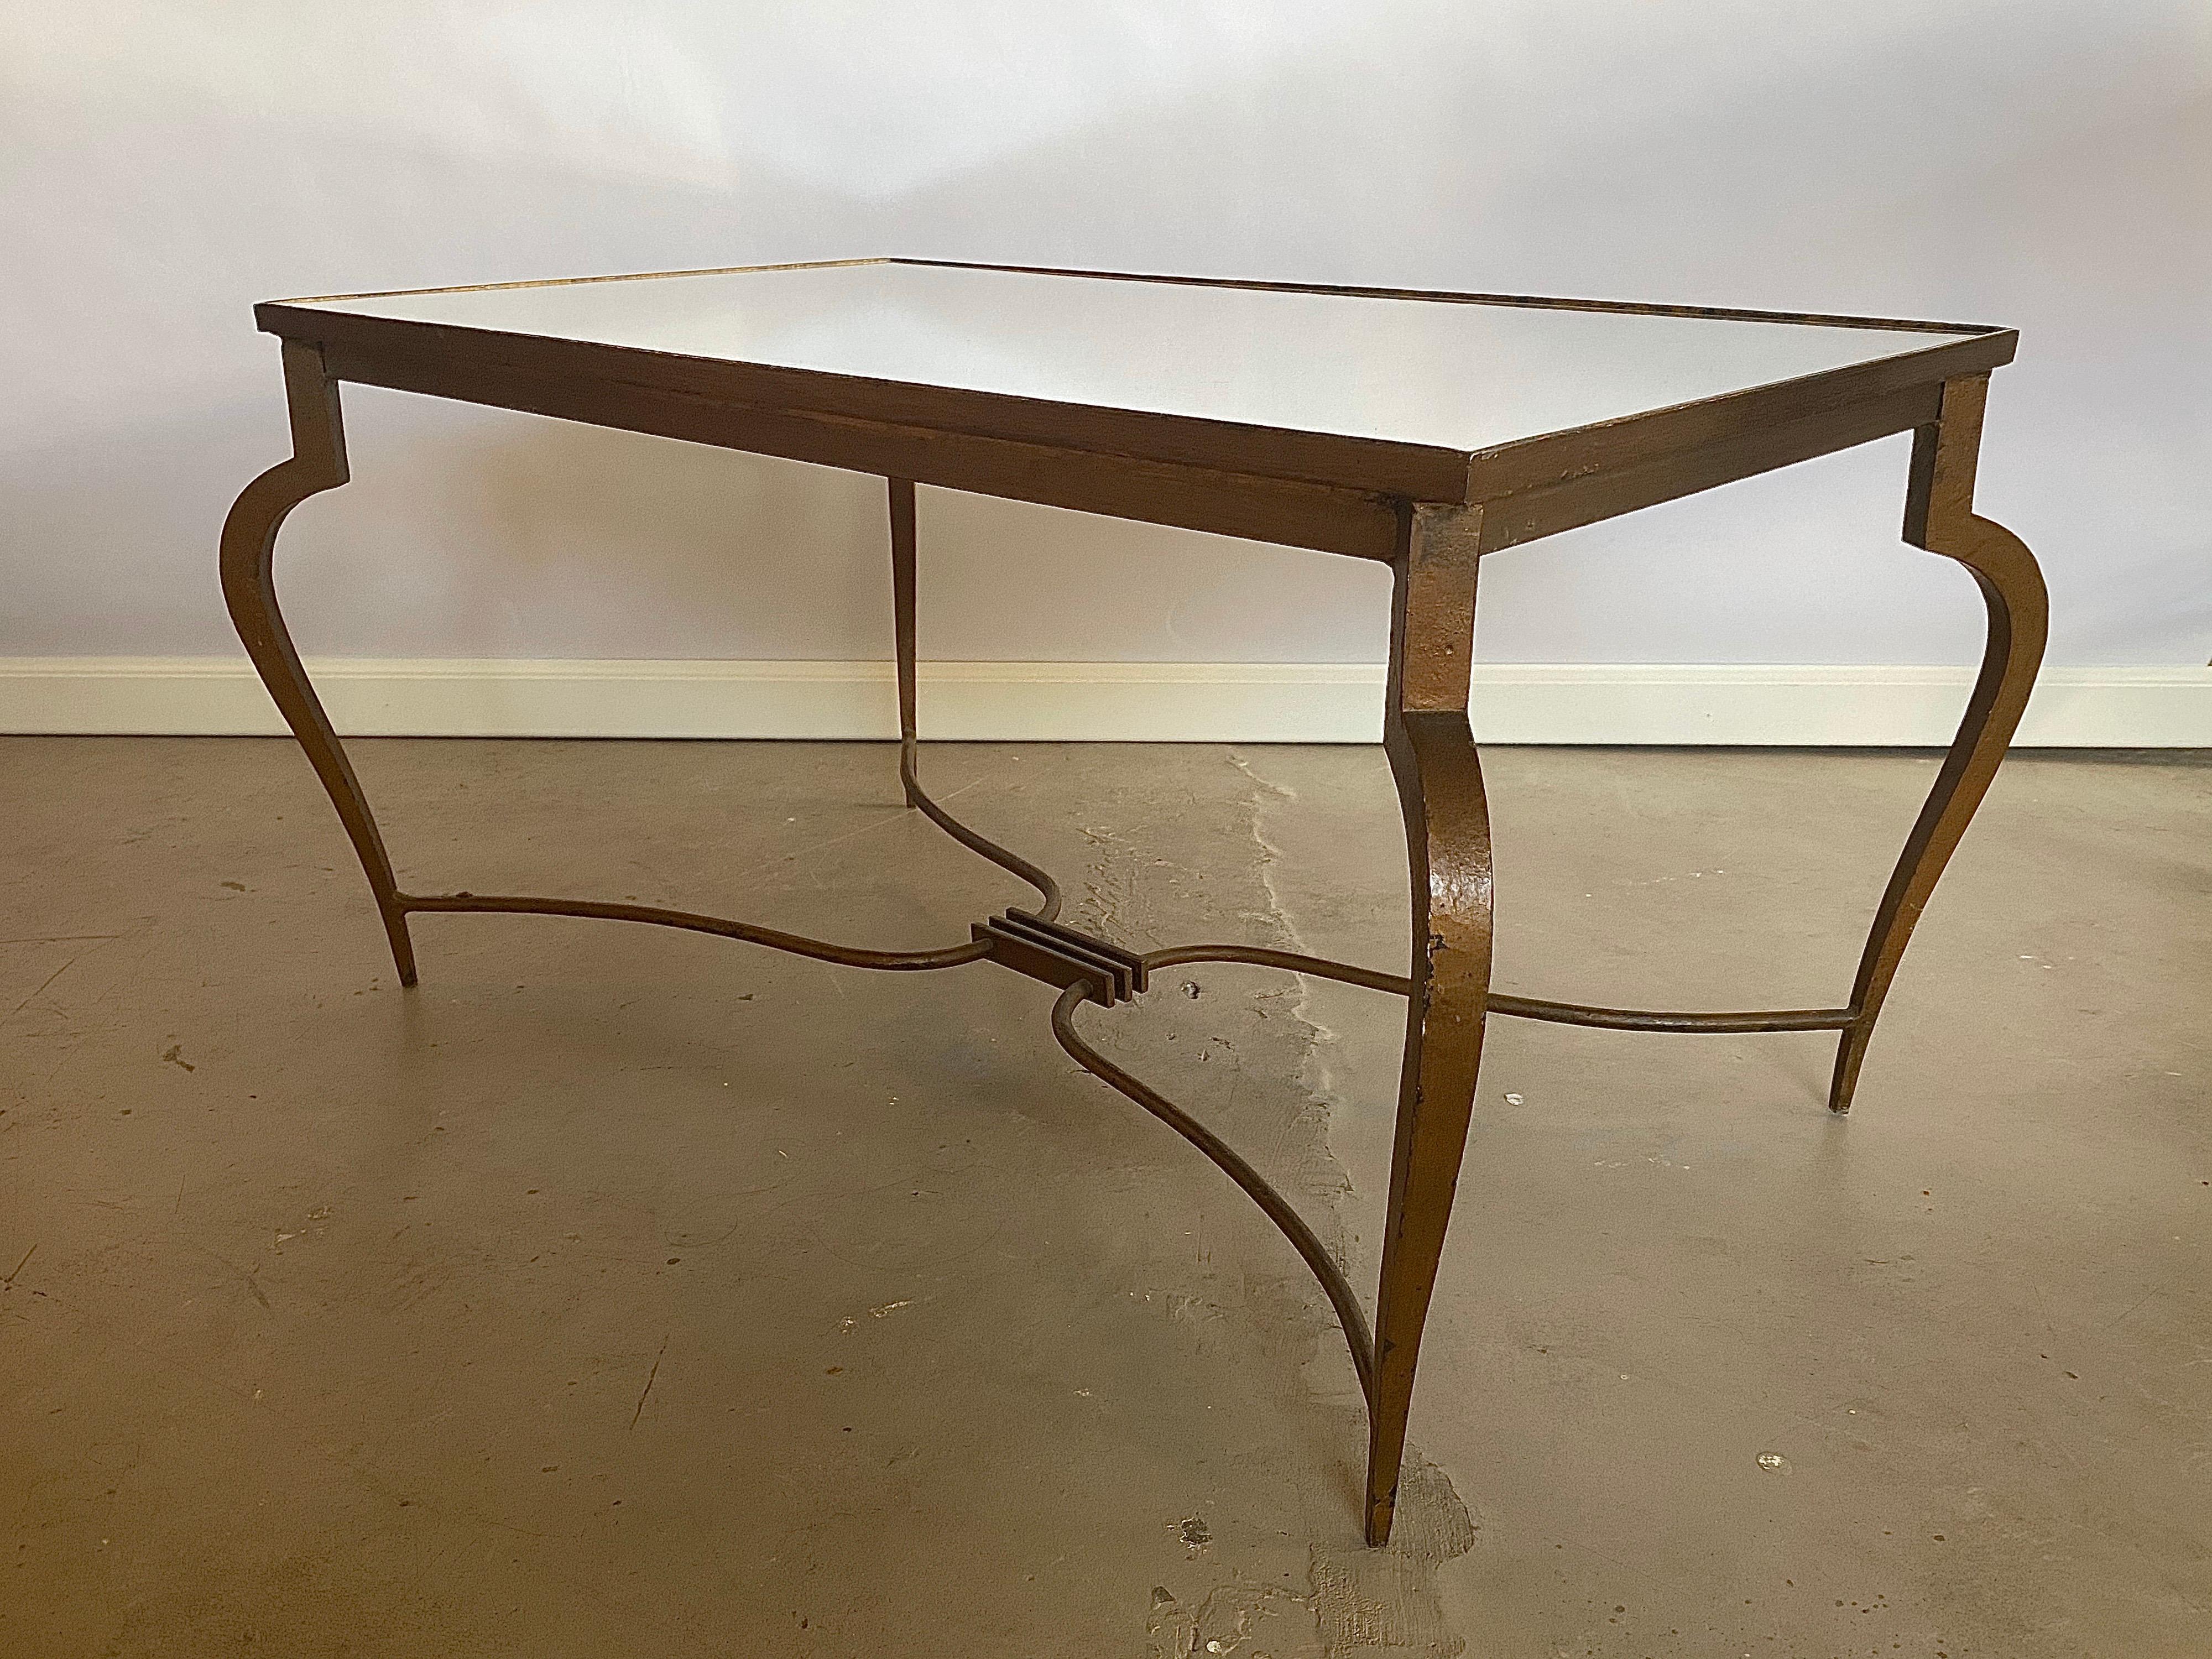 Very elegant coffee table made of wrought iron with a rectangular inset mirror-glass top. Notice the distinguishly bent and curved legs, typical for the 1940s designs of René Prou. The table has a beautifully developed patina over the years which